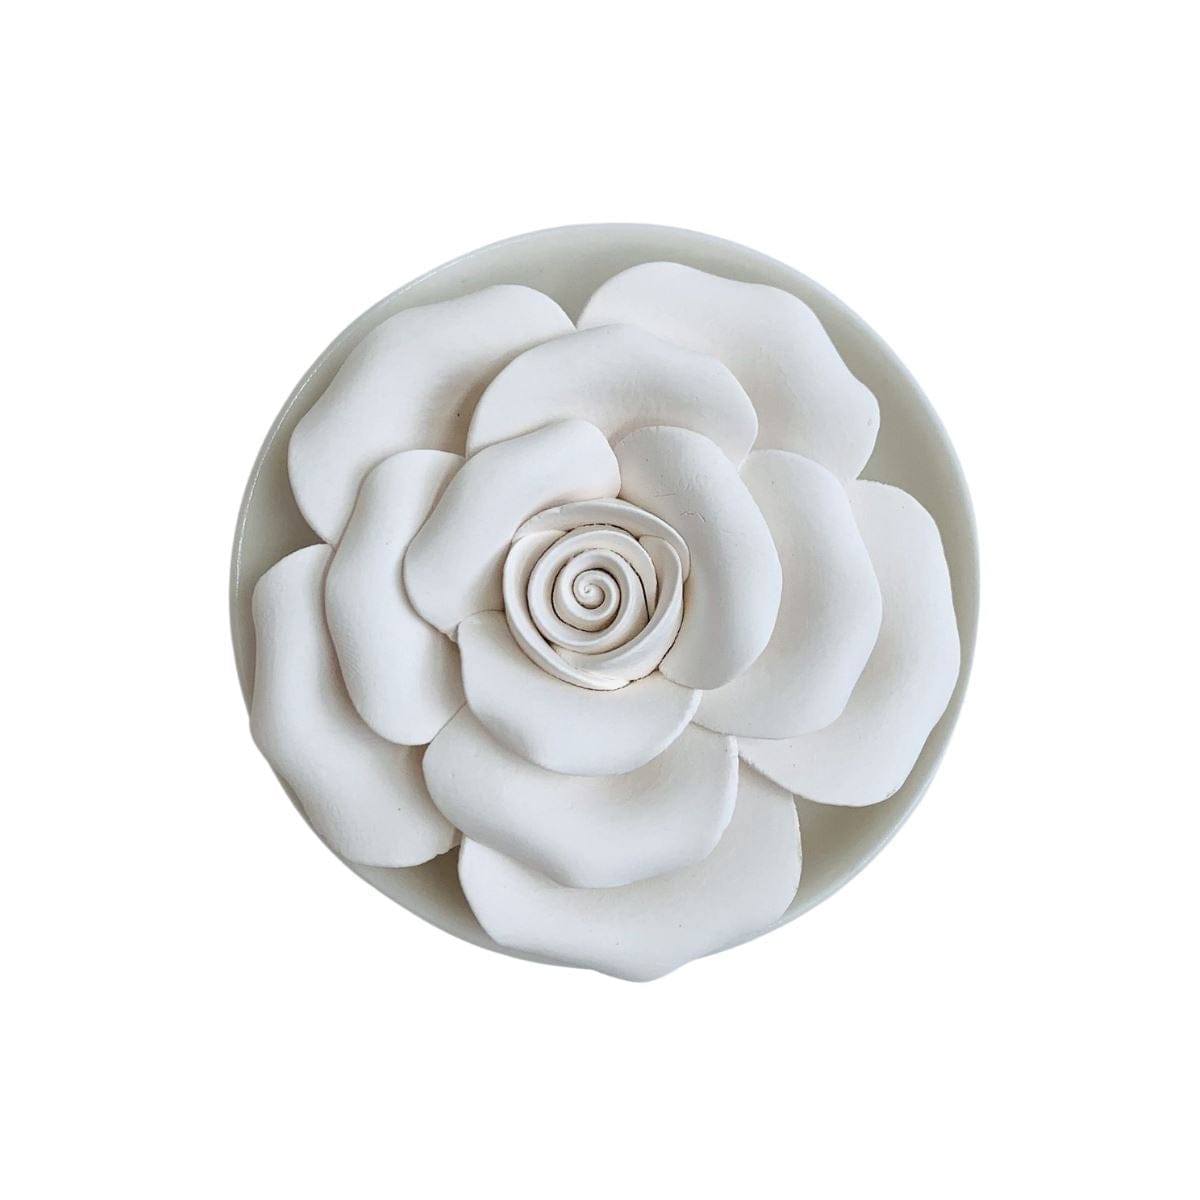 Rose Flower Clay Scent Diffuser - Scent - White rose with ceramic dish - Preserved Flowers & Fresh Flower Florist Gift Store